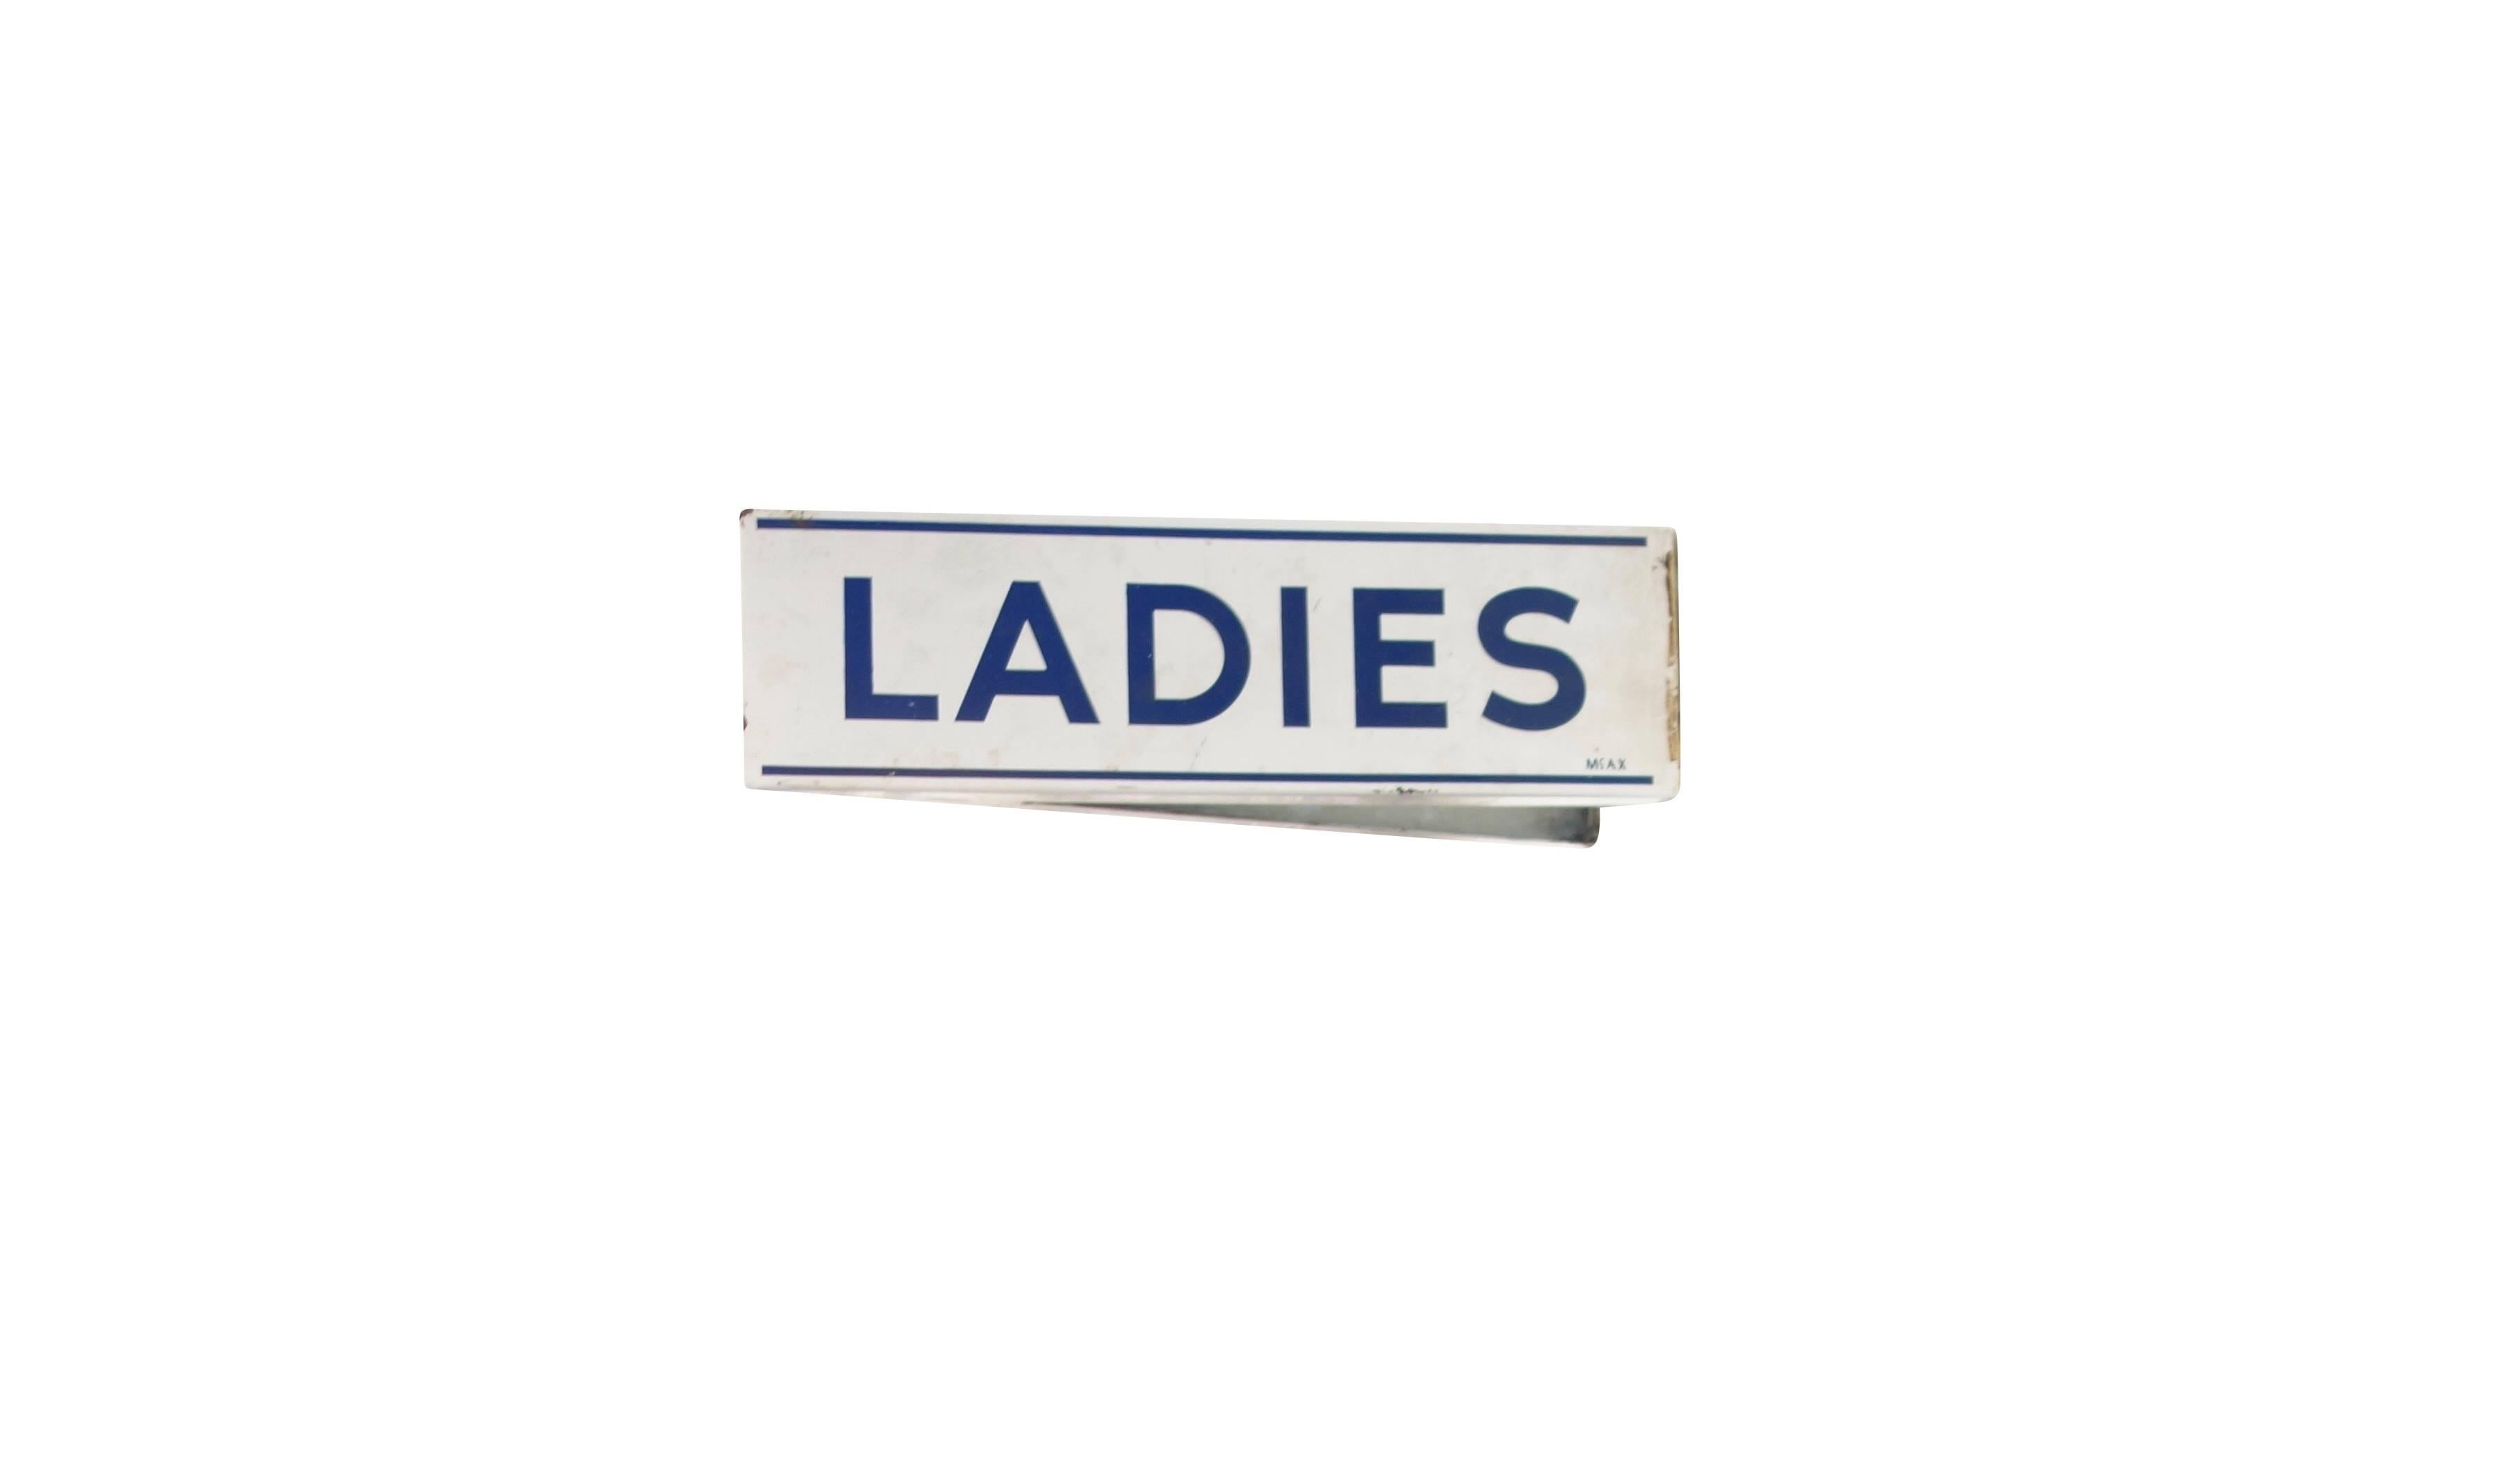 This is a double sided wall mount porcelain enamel ladies restroom sign in excellent condition.